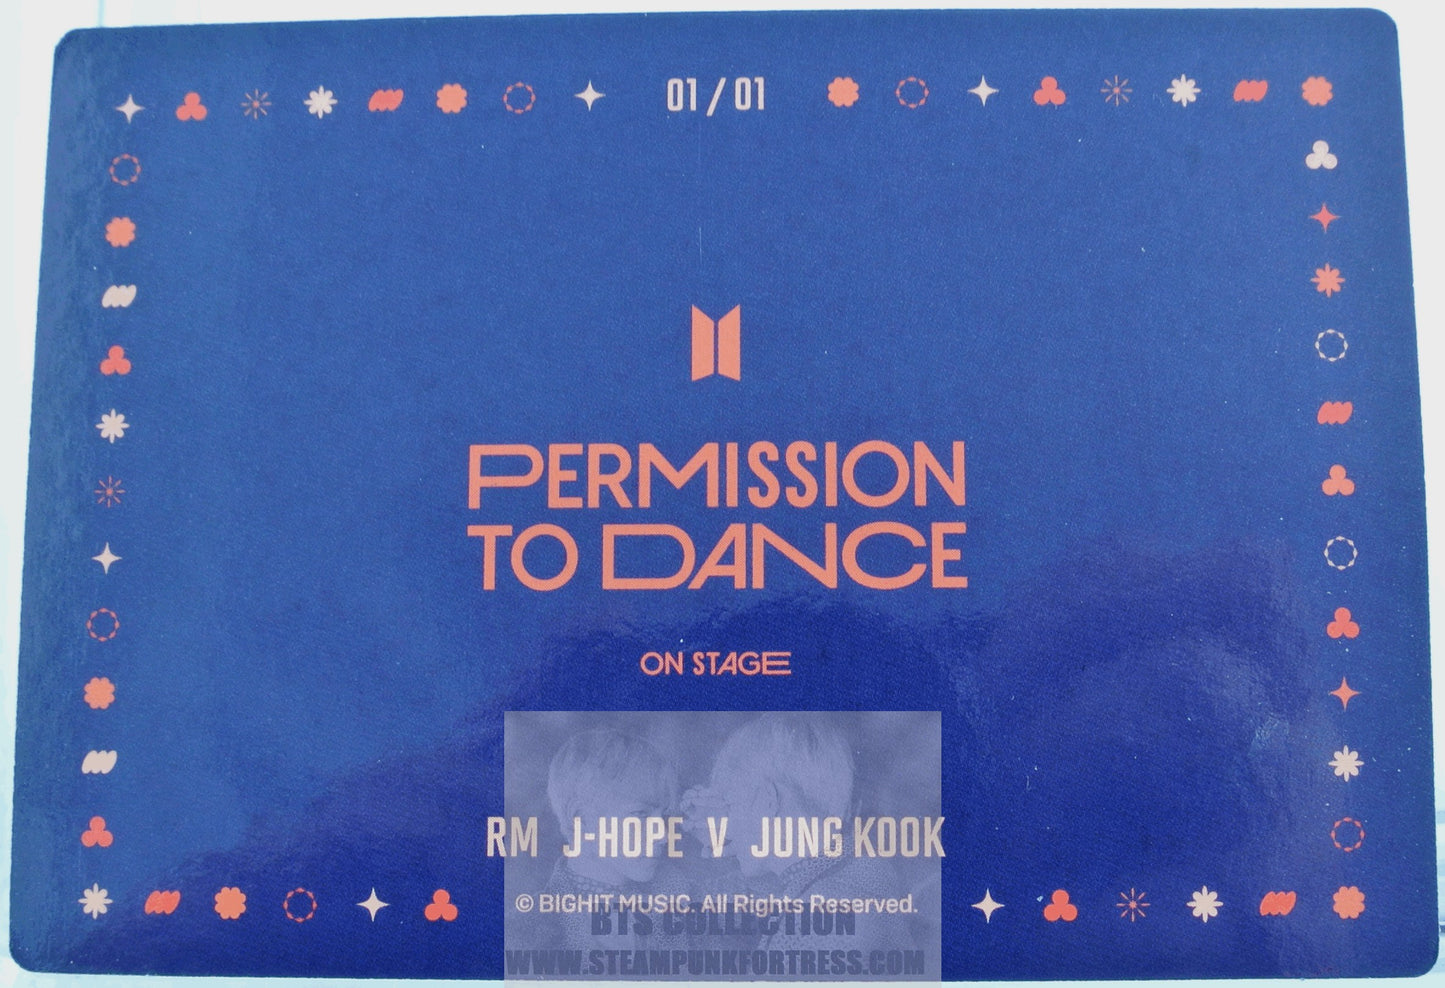 BTS PERMISSION TO DANCE ON STAGE SEOUL PTD JUNGKOOK JEON V KIM TAEHYUNG JHOPE JUNG HOSEOK RM KIM NAMJOON 2022 PHOTOCARD PHOTO CARD #1 OF 1 NEW OFFICIAL MERCHANDISE